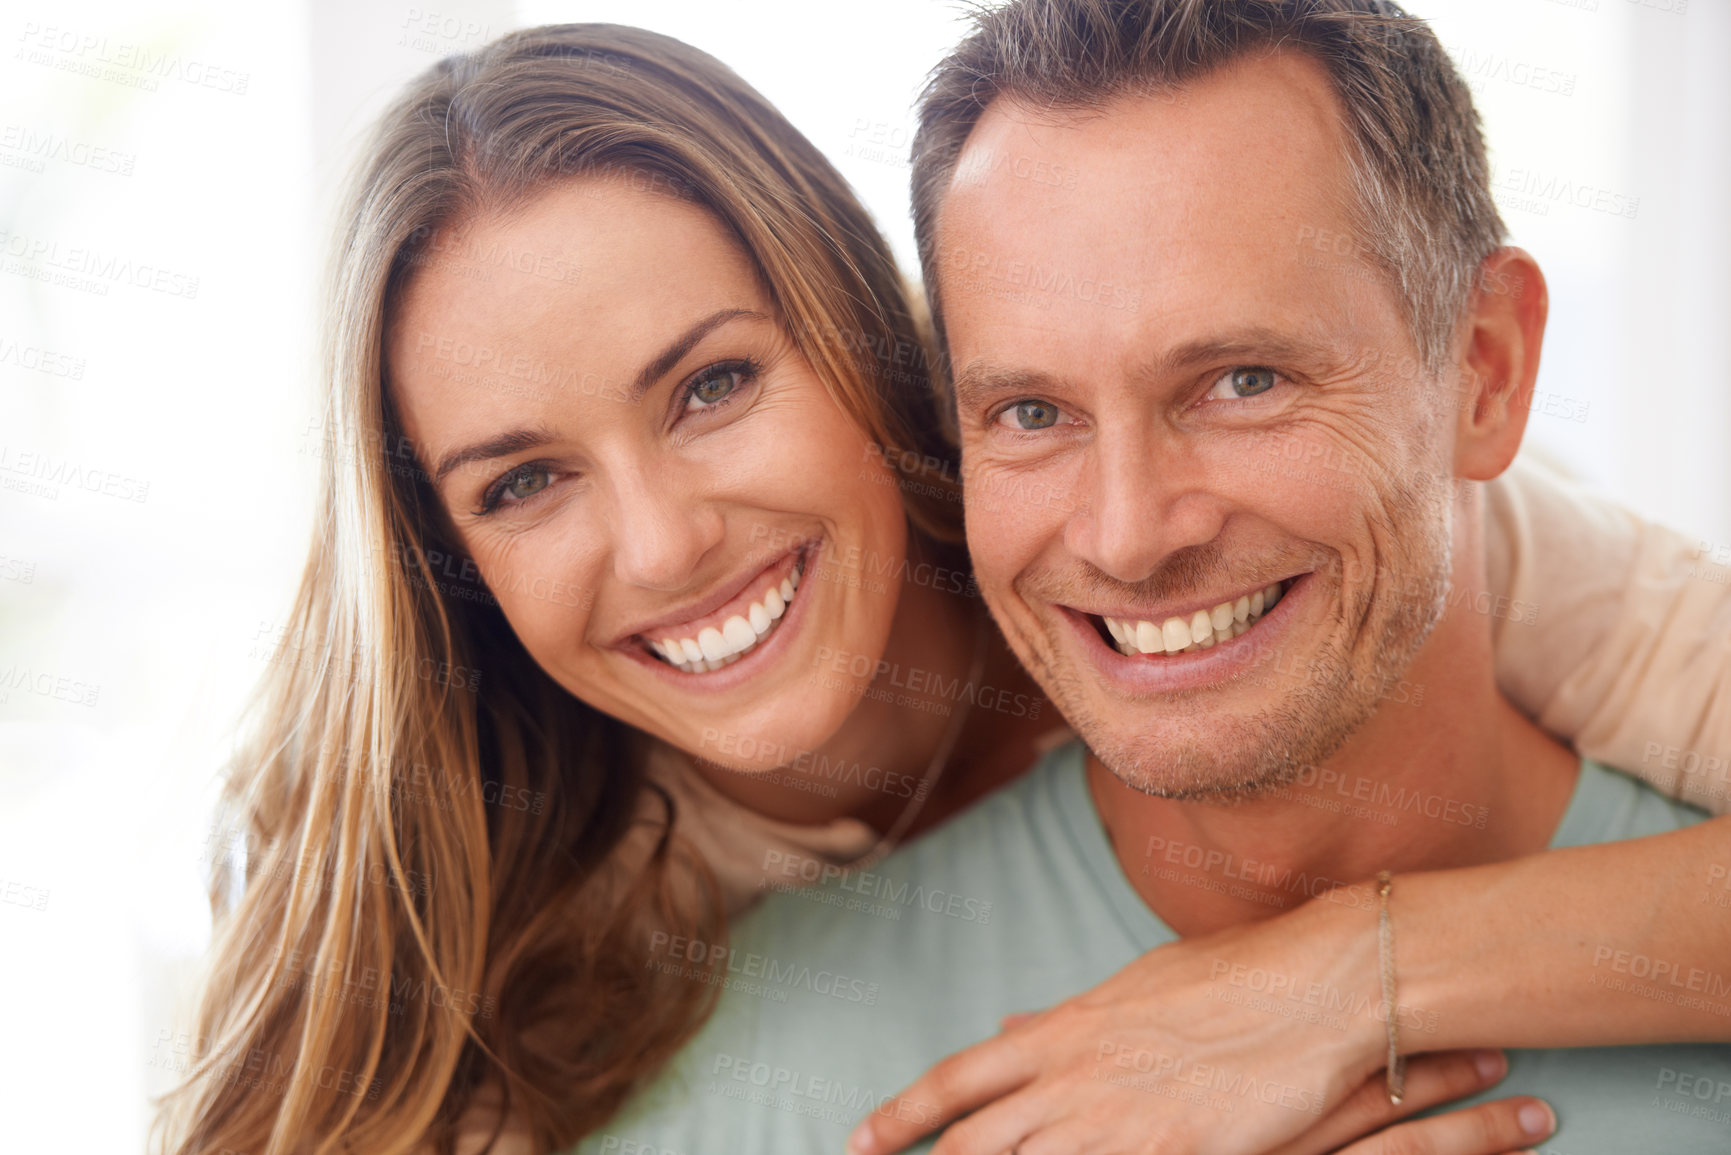 Buy stock photo Portrait of a happy and affectionate couple